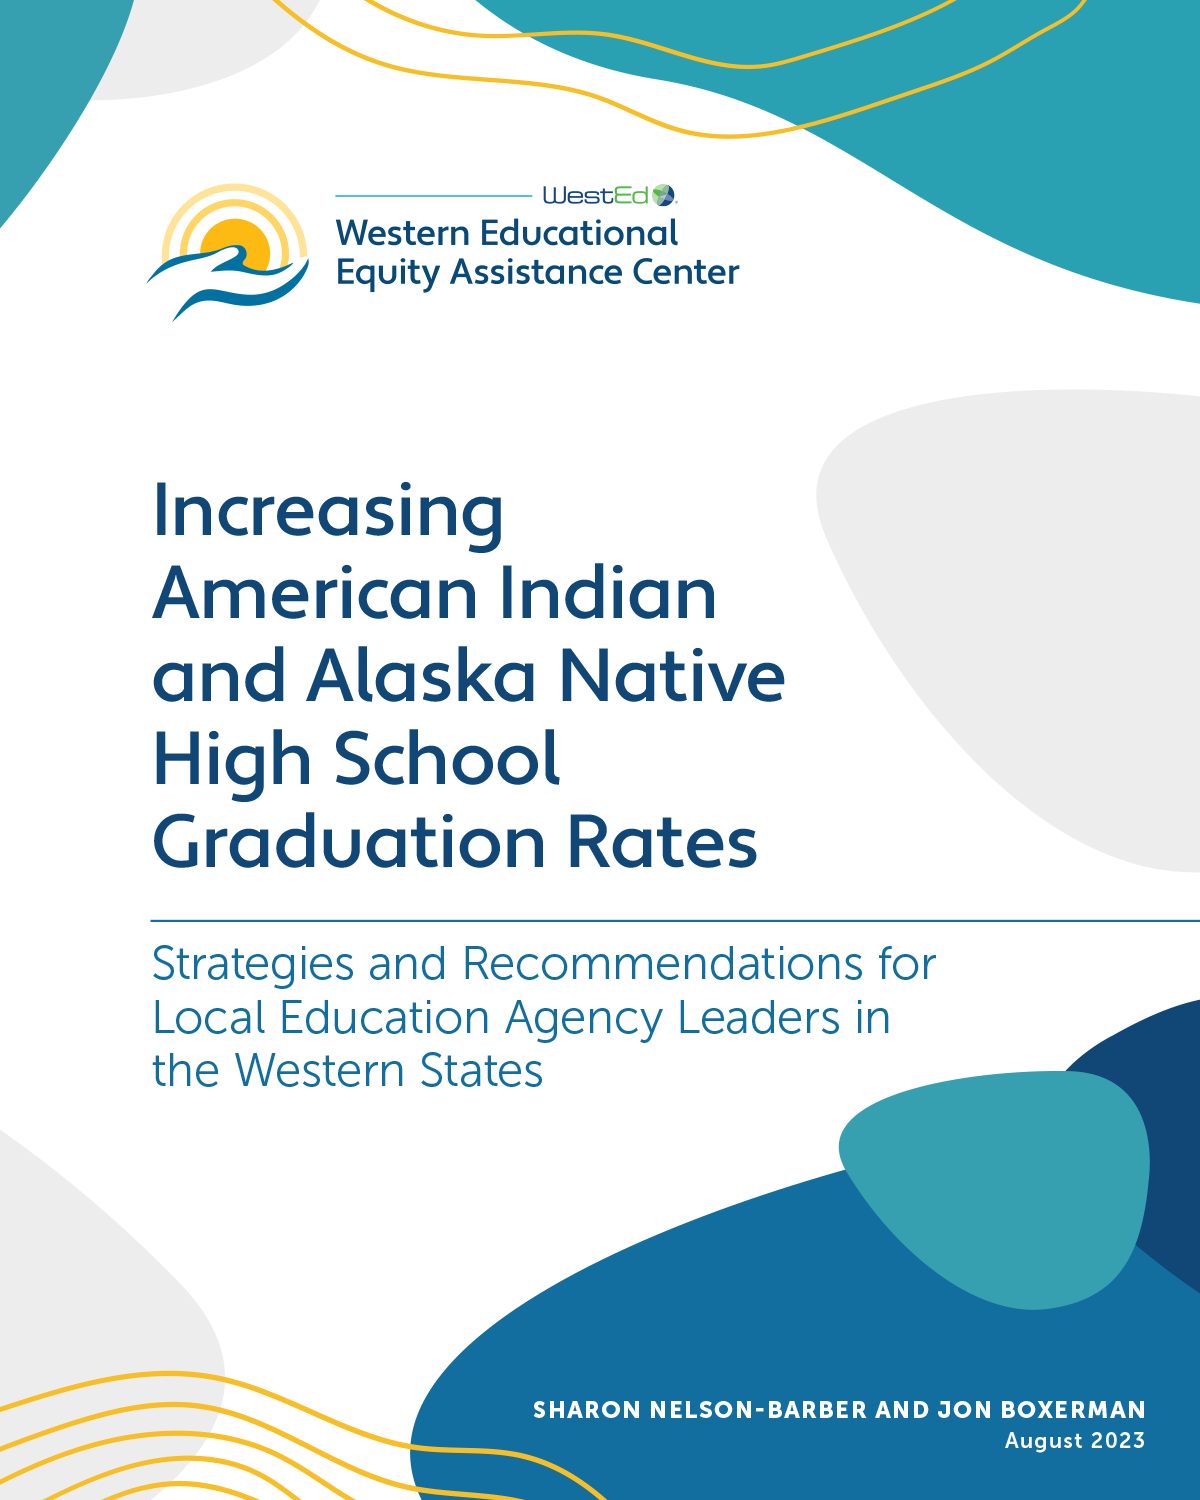 Increasing American Indian and Alaska Native High School Graduation Rates. Strategies and Recommendations for Local Education Agency Leaders in the Western States